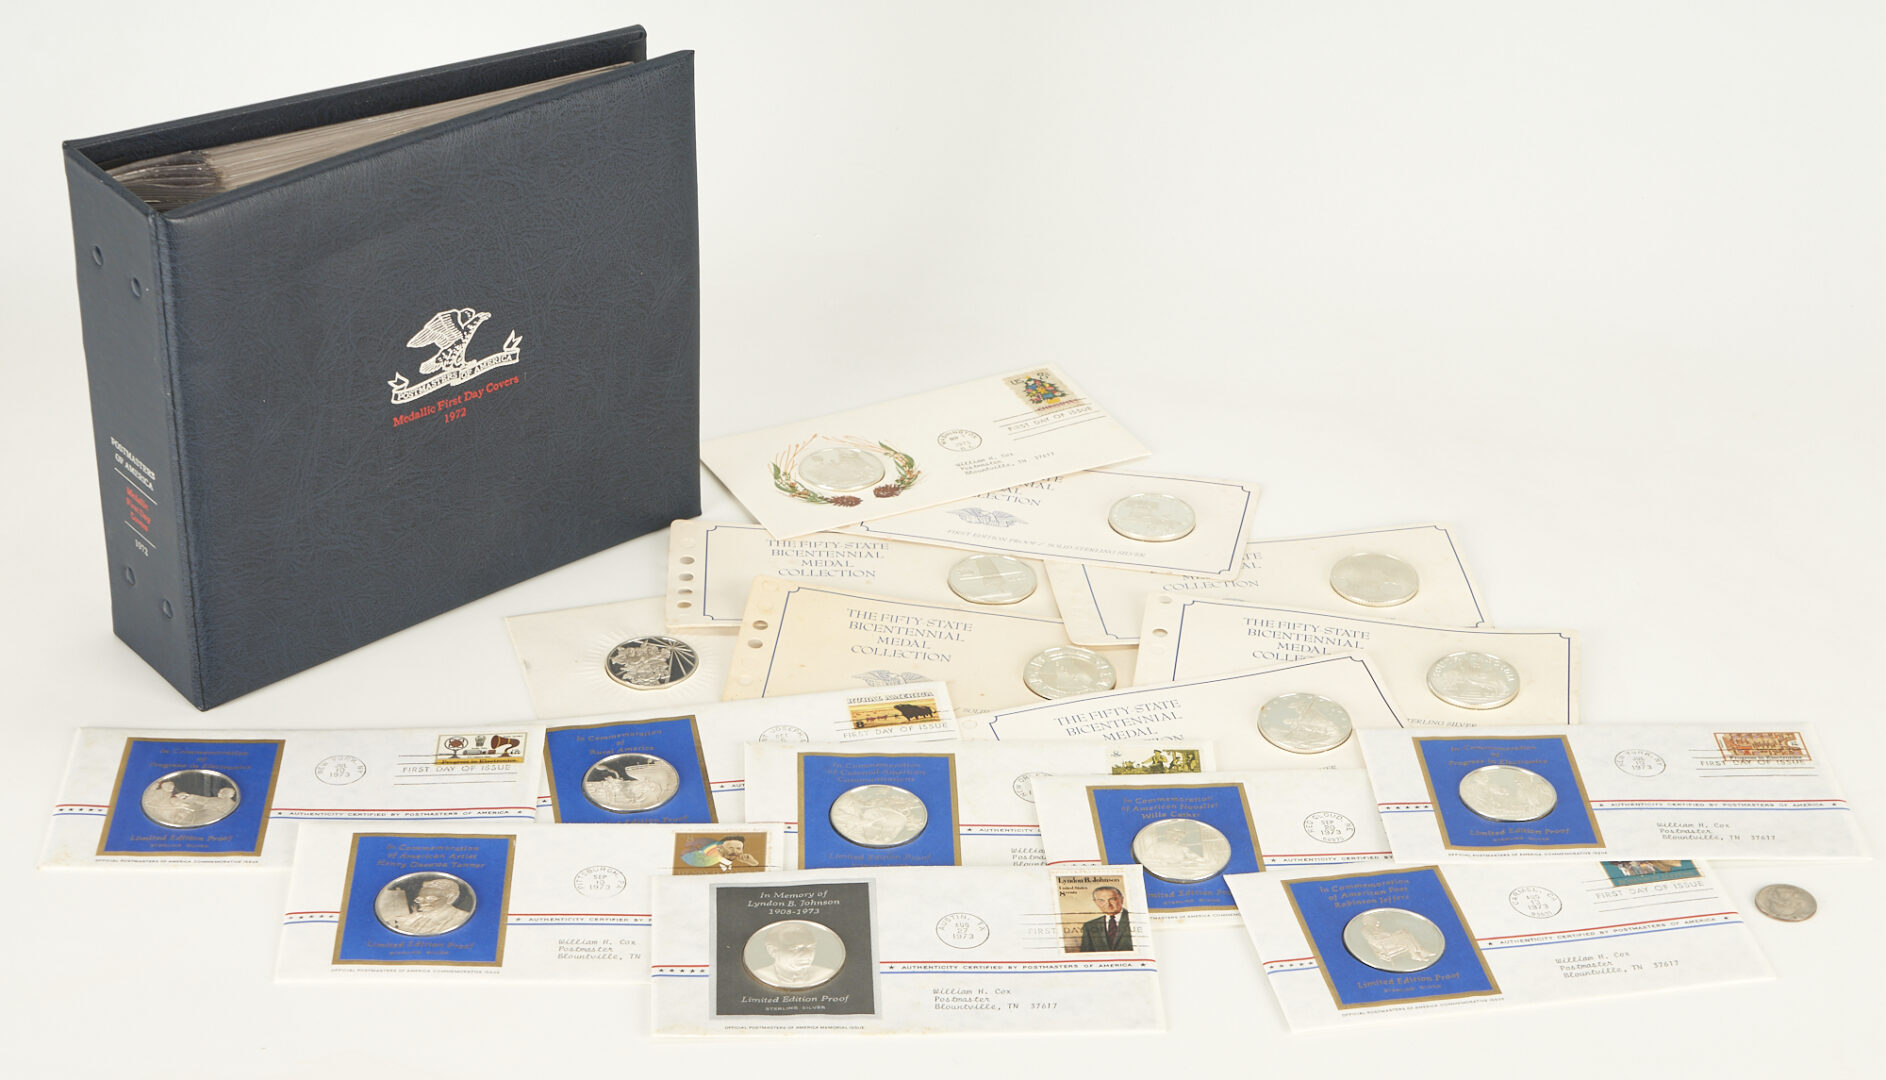 Lot 740: 29 Postmaster Commemorative Coins & 6 Franklin Mint Sterling Silver Coins